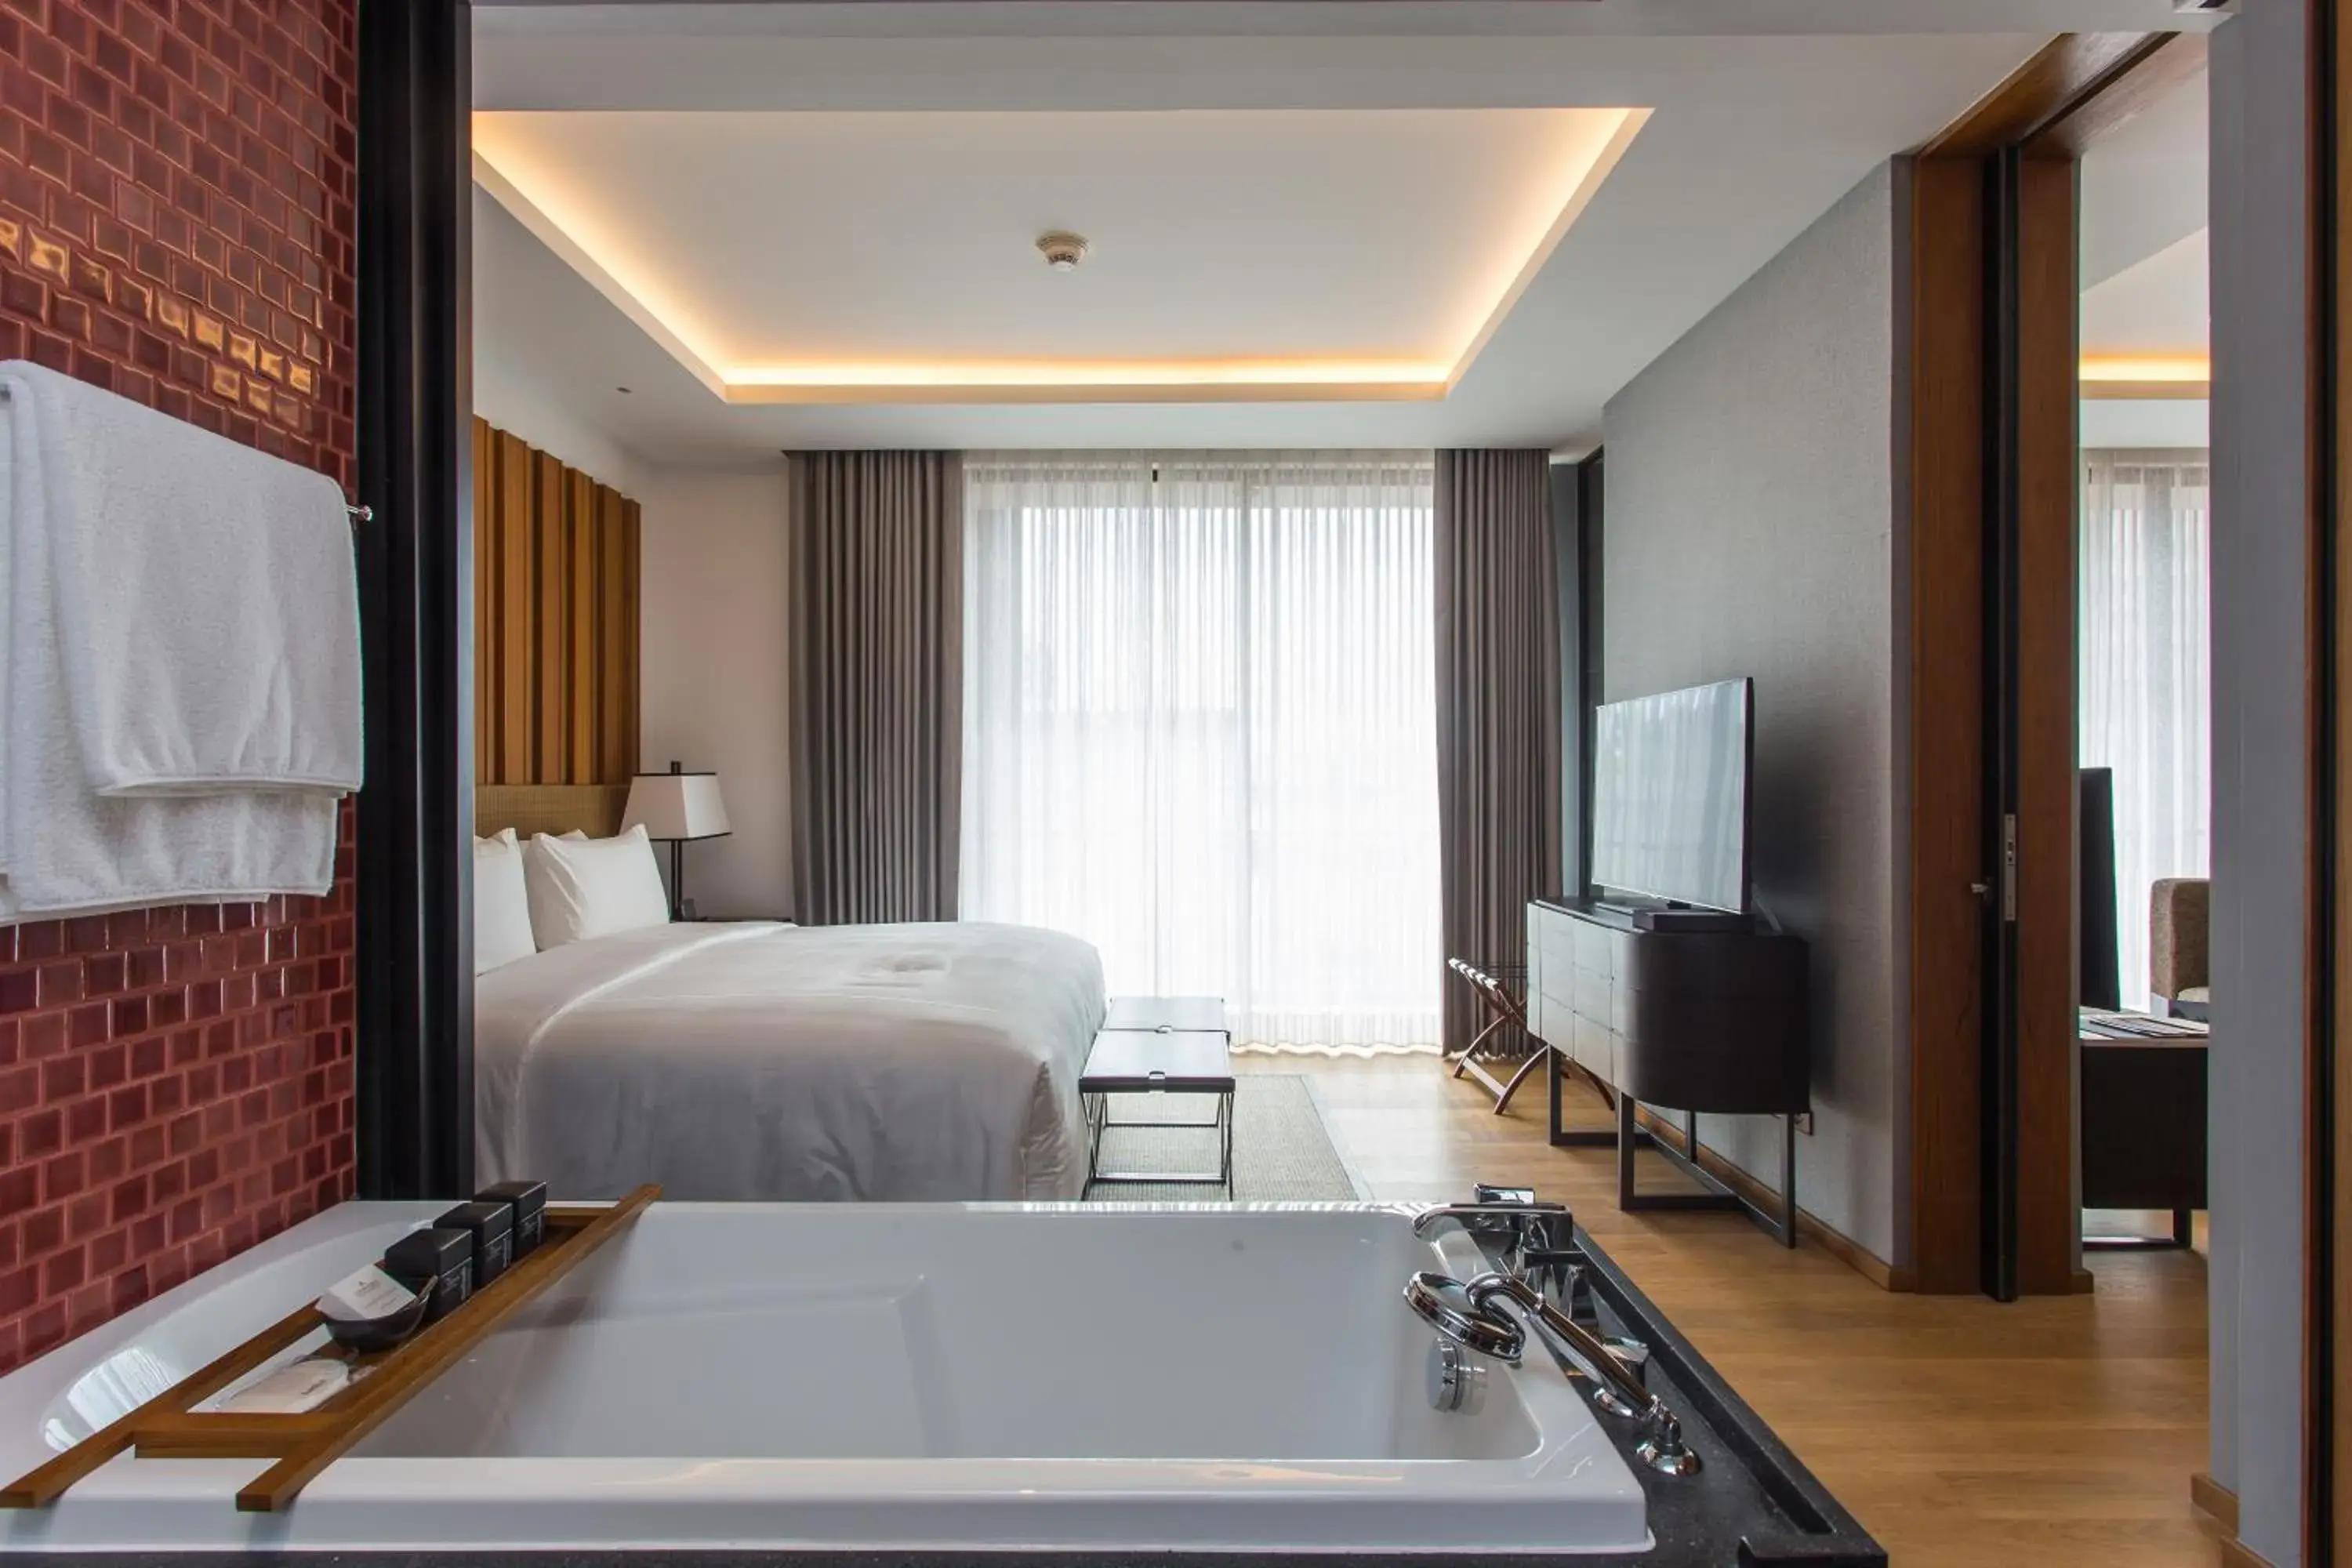 People in Anantara Chiang Mai Serviced Suites